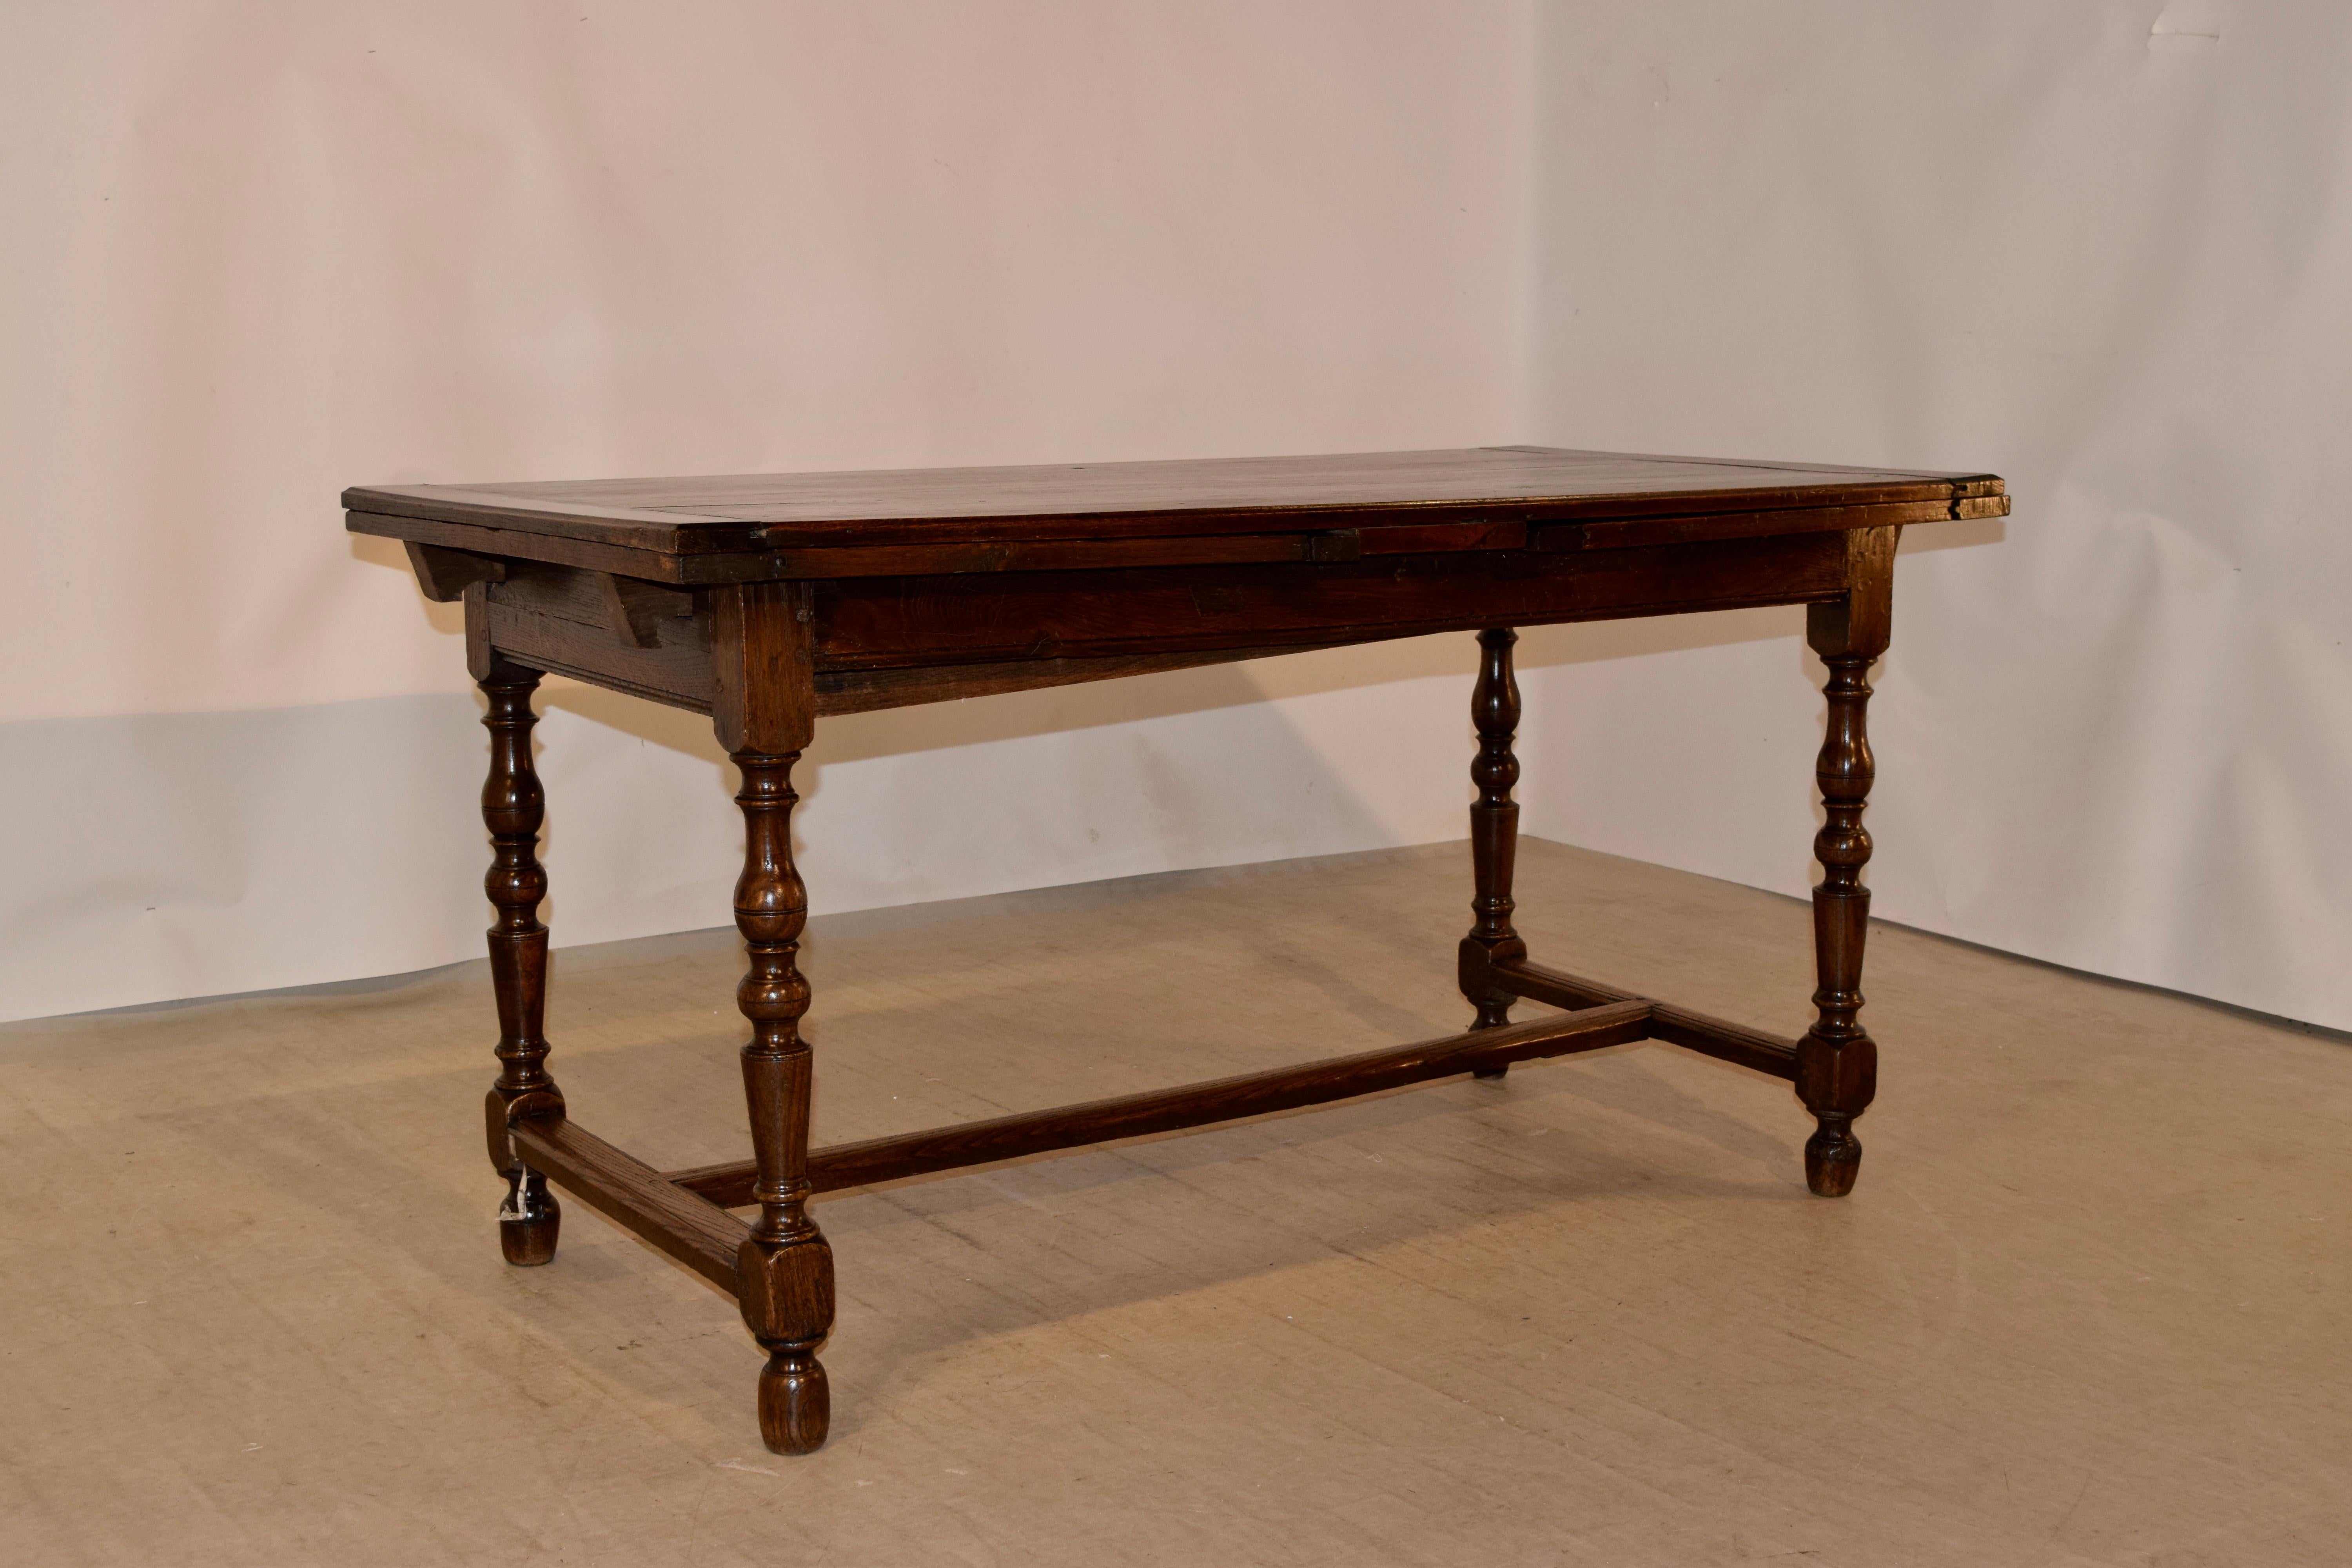 19th century French tavern drawleaf made from oak. The top extends to measure 106.25 inches in length! When closed, it measures 57 inches, for easy placement in any room. The top is simple and has banded ends to help with shrinkage, over a simple